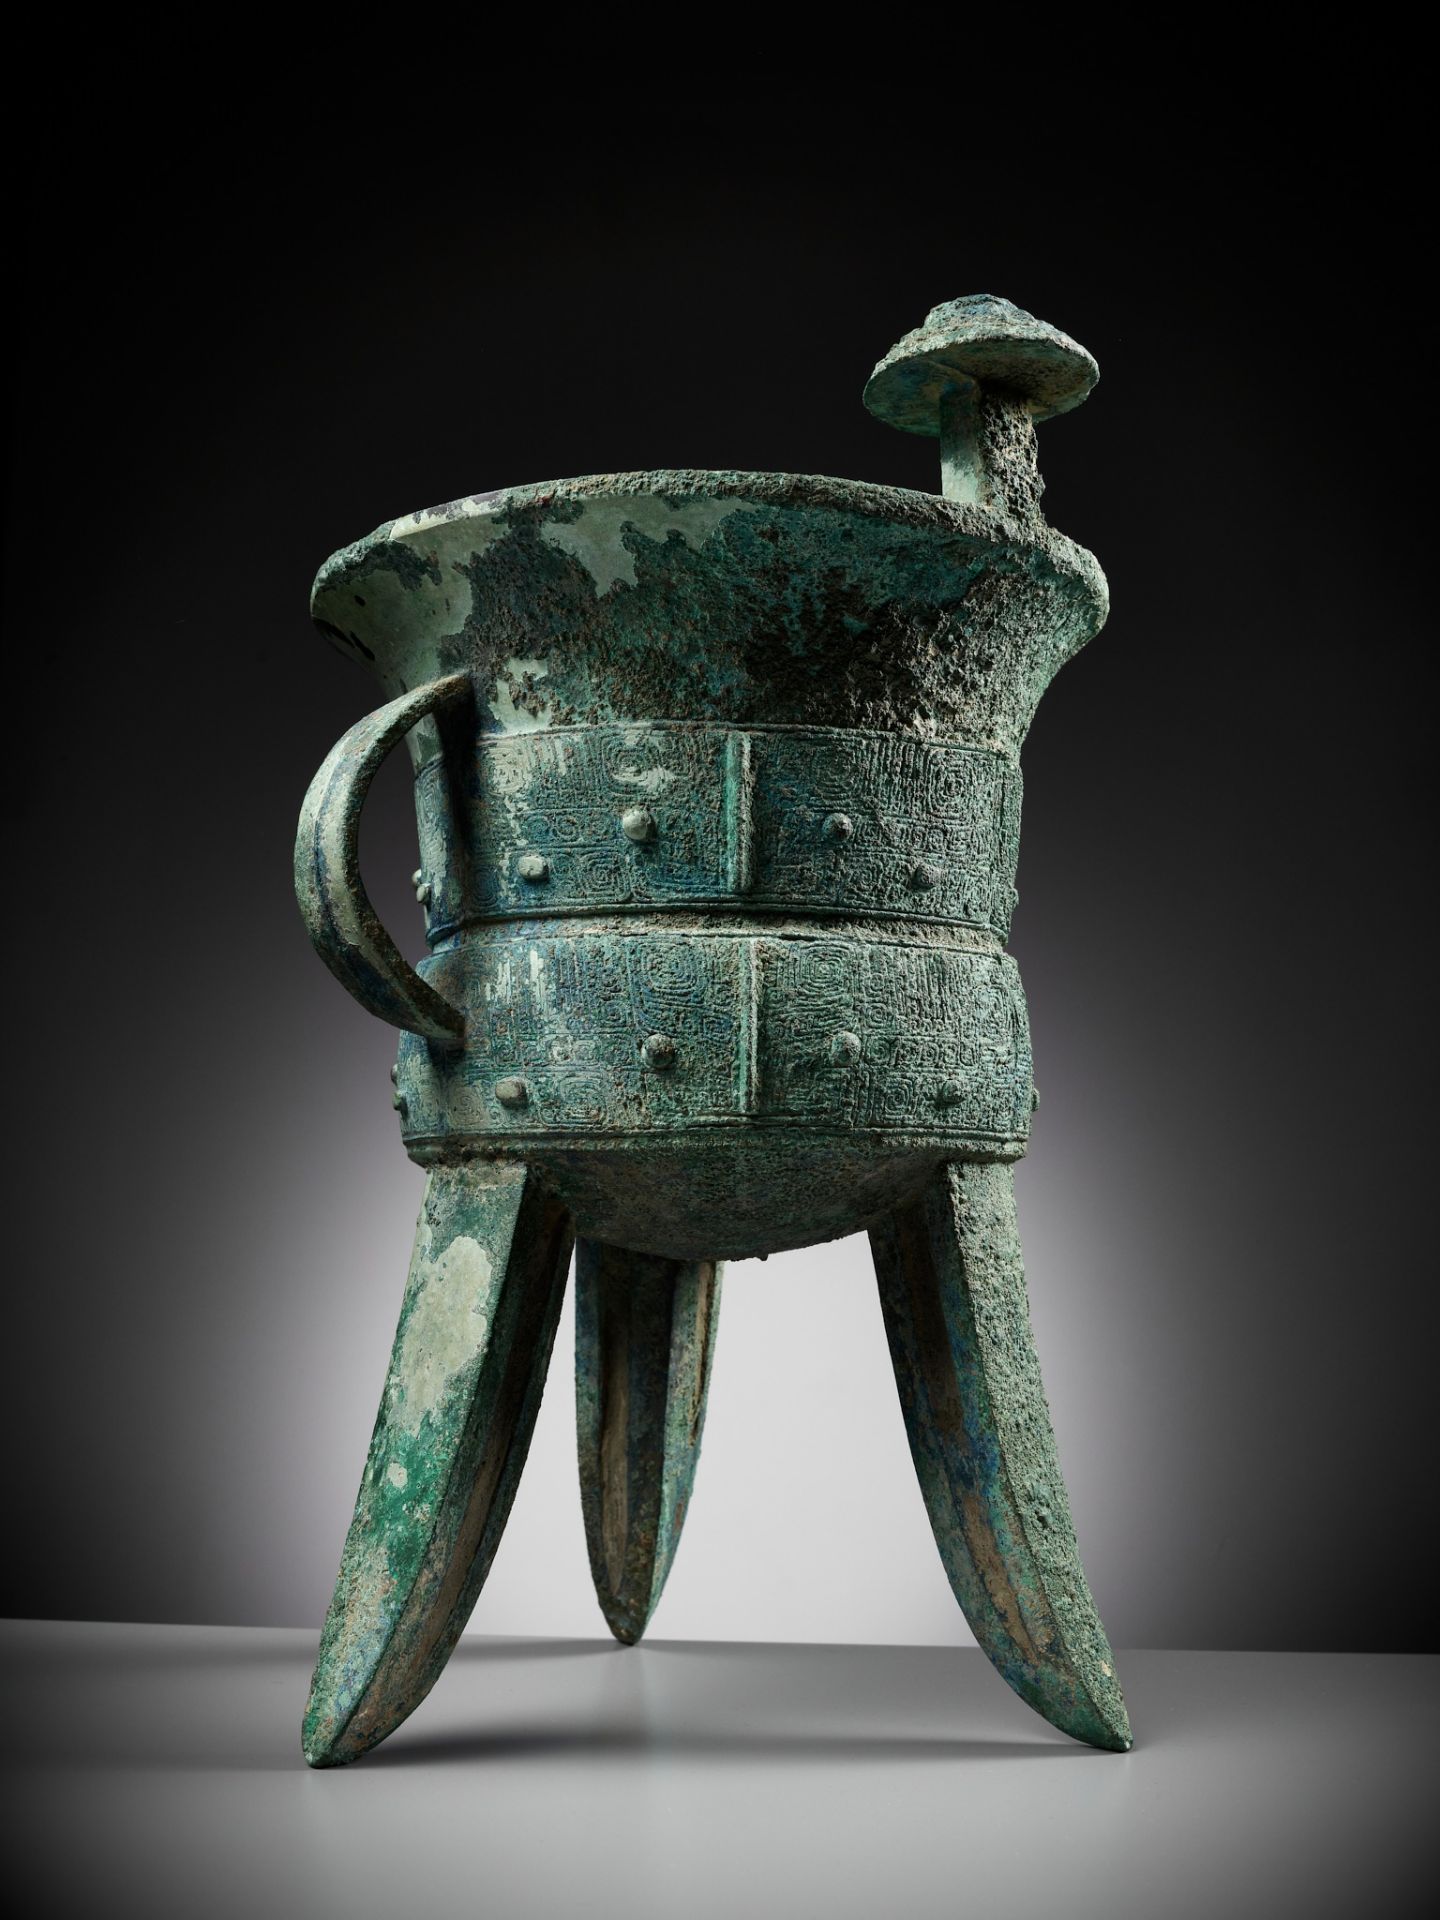 AN EXCEPTIONALLY LARGE AND MASSIVE BRONZE RITUAL TRIPOD WINE VESSEL, JIA, WITH A CLAN MARK, SHANG - Image 28 of 29